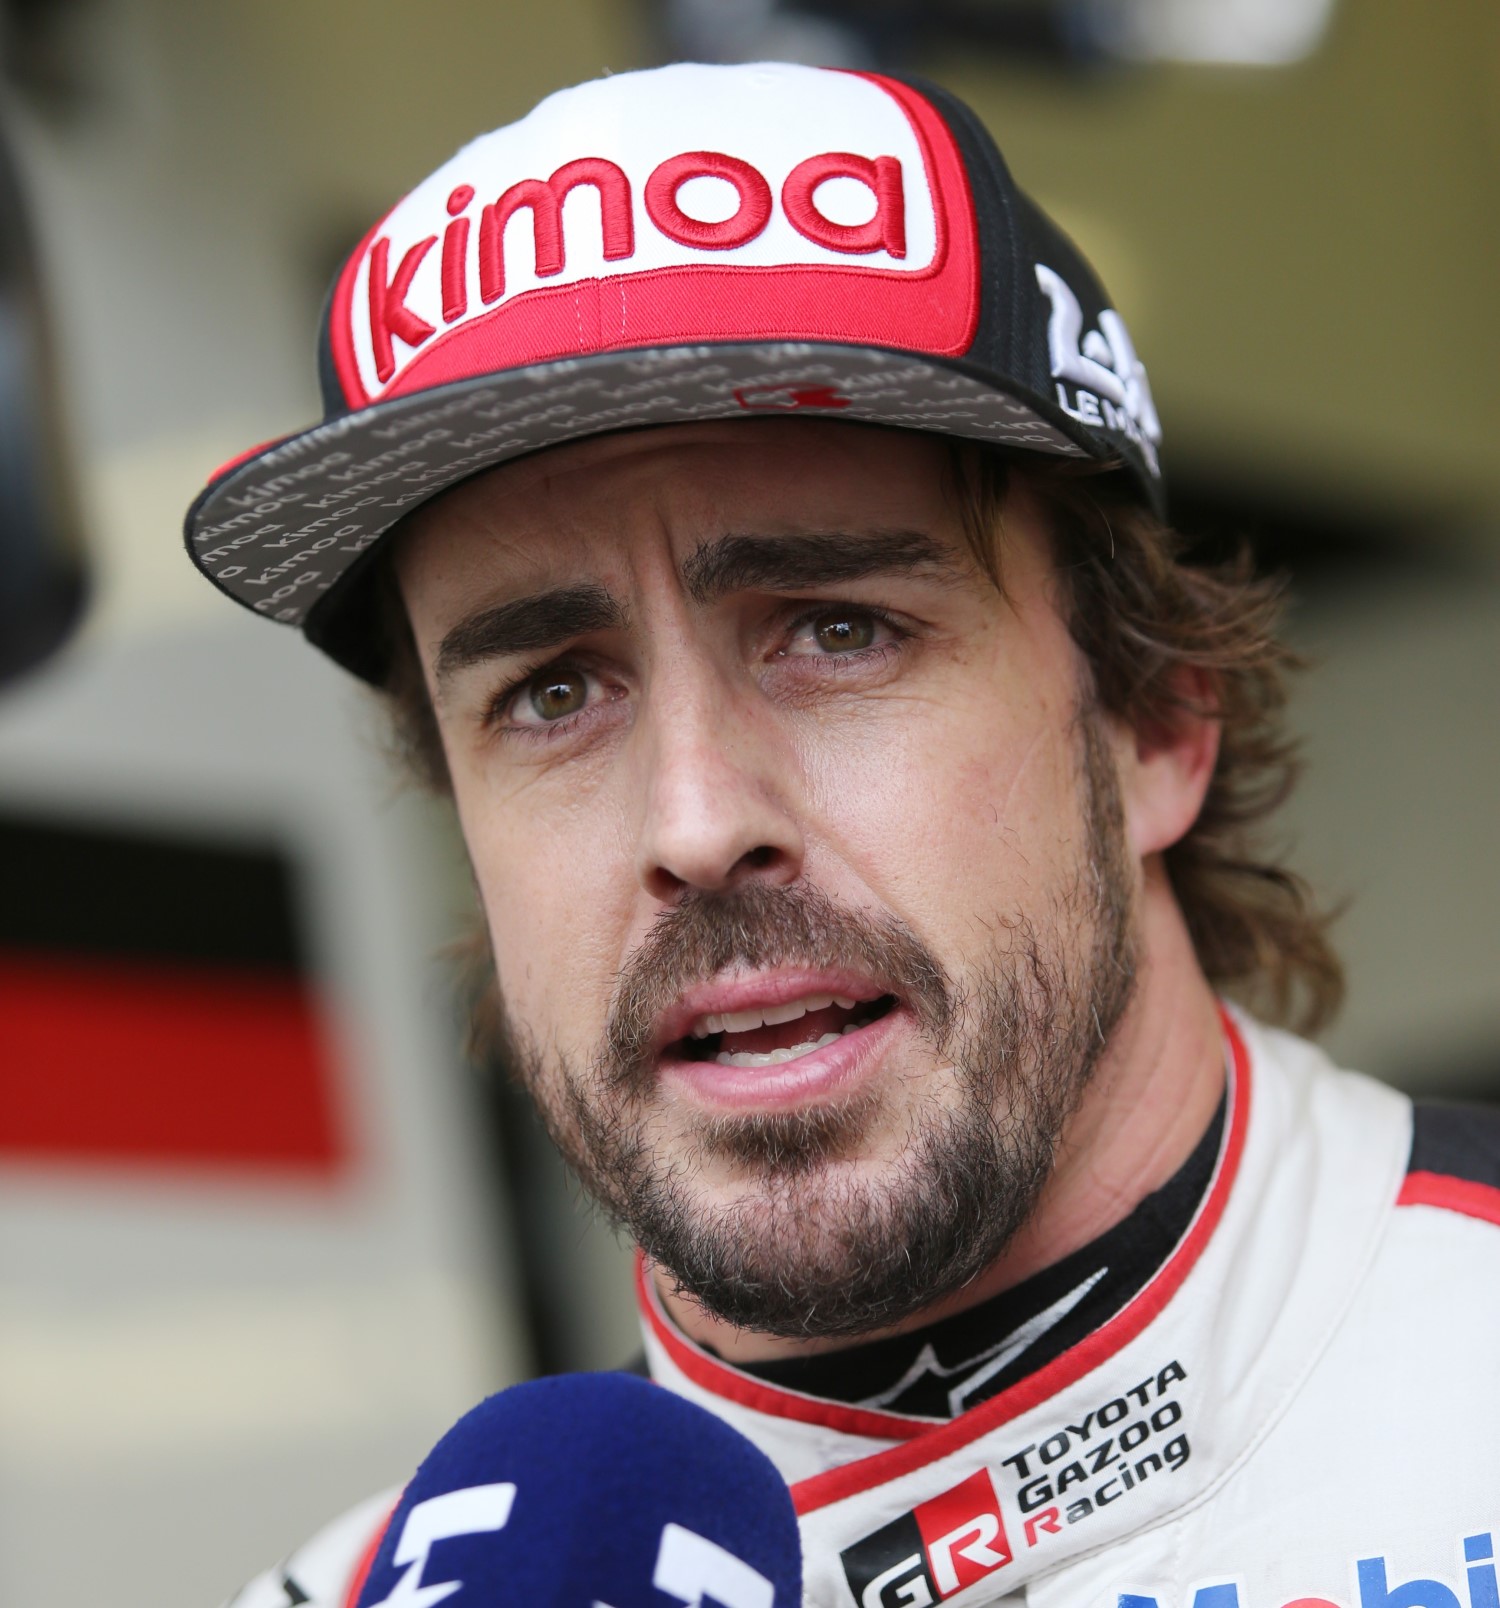 Alonso, like many others, not happy with Magnussen